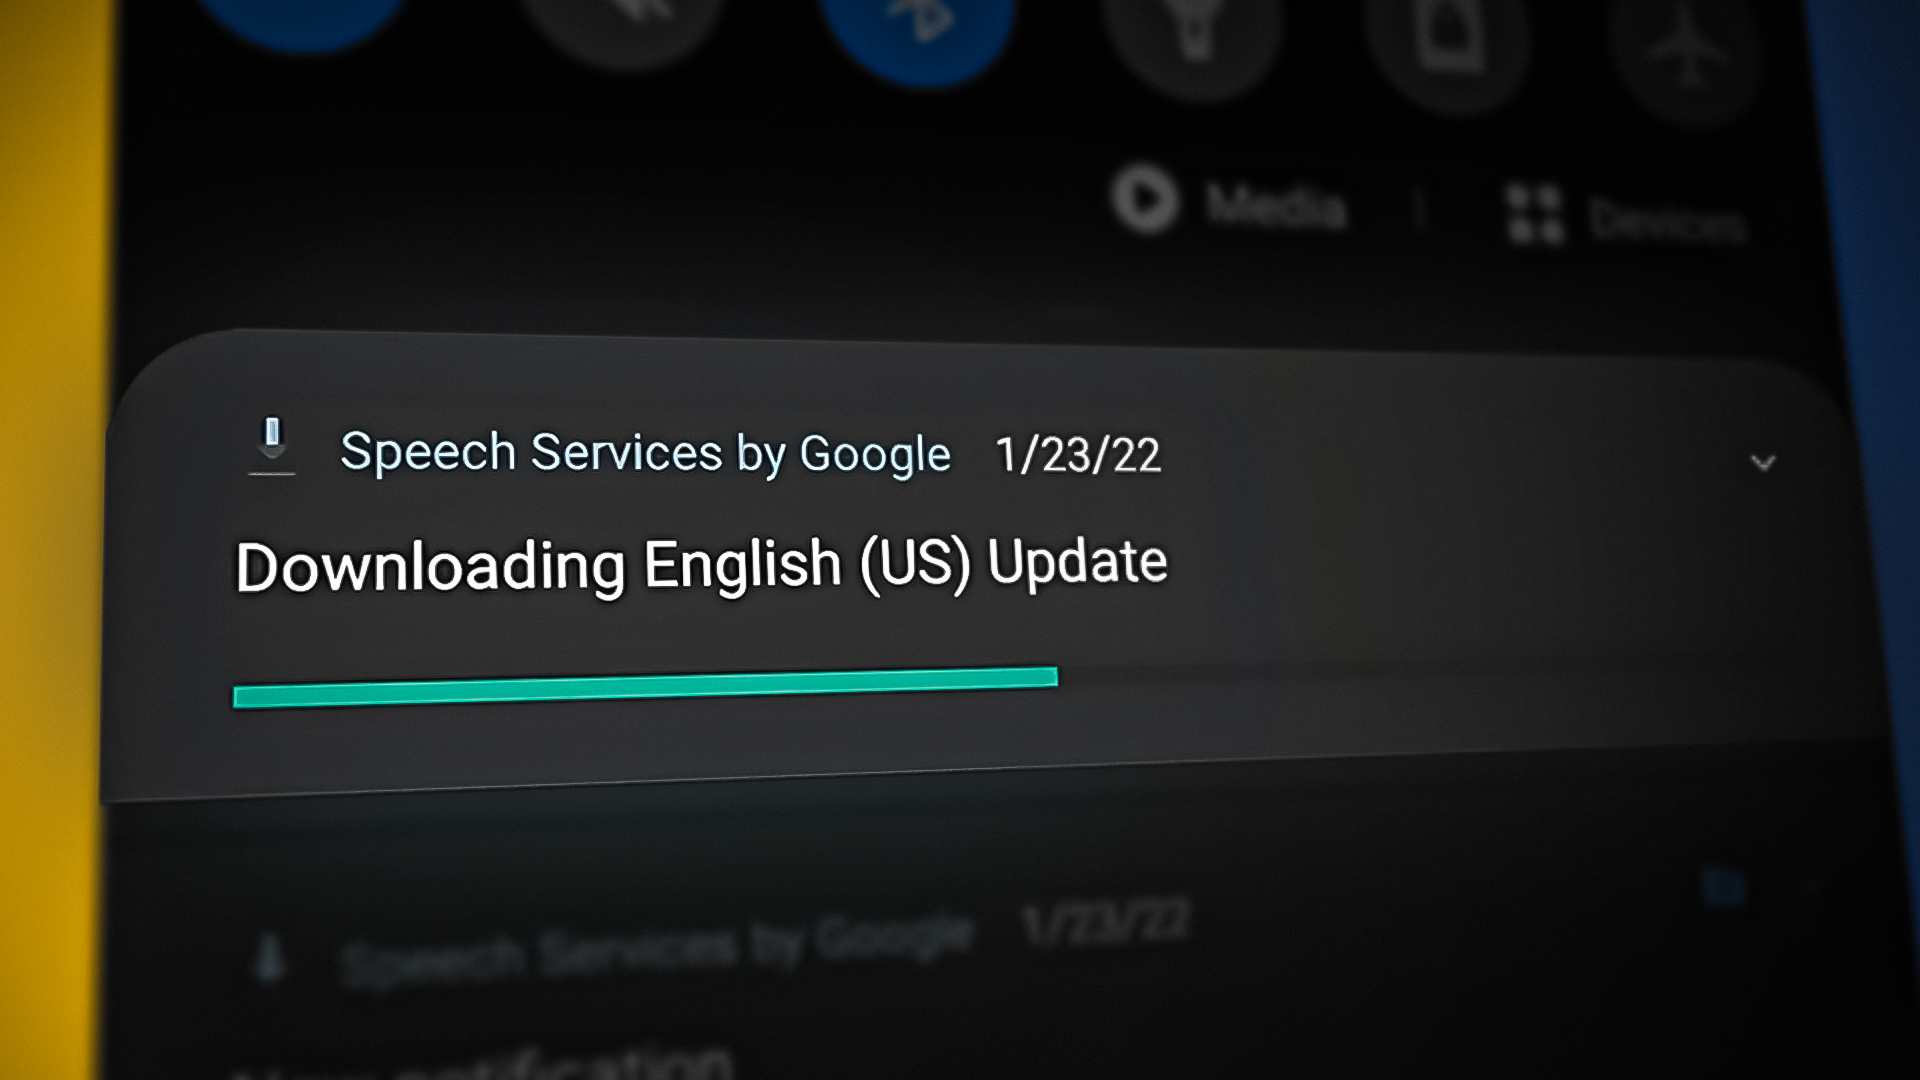 Speech Services by Google Wont Stop Downloading